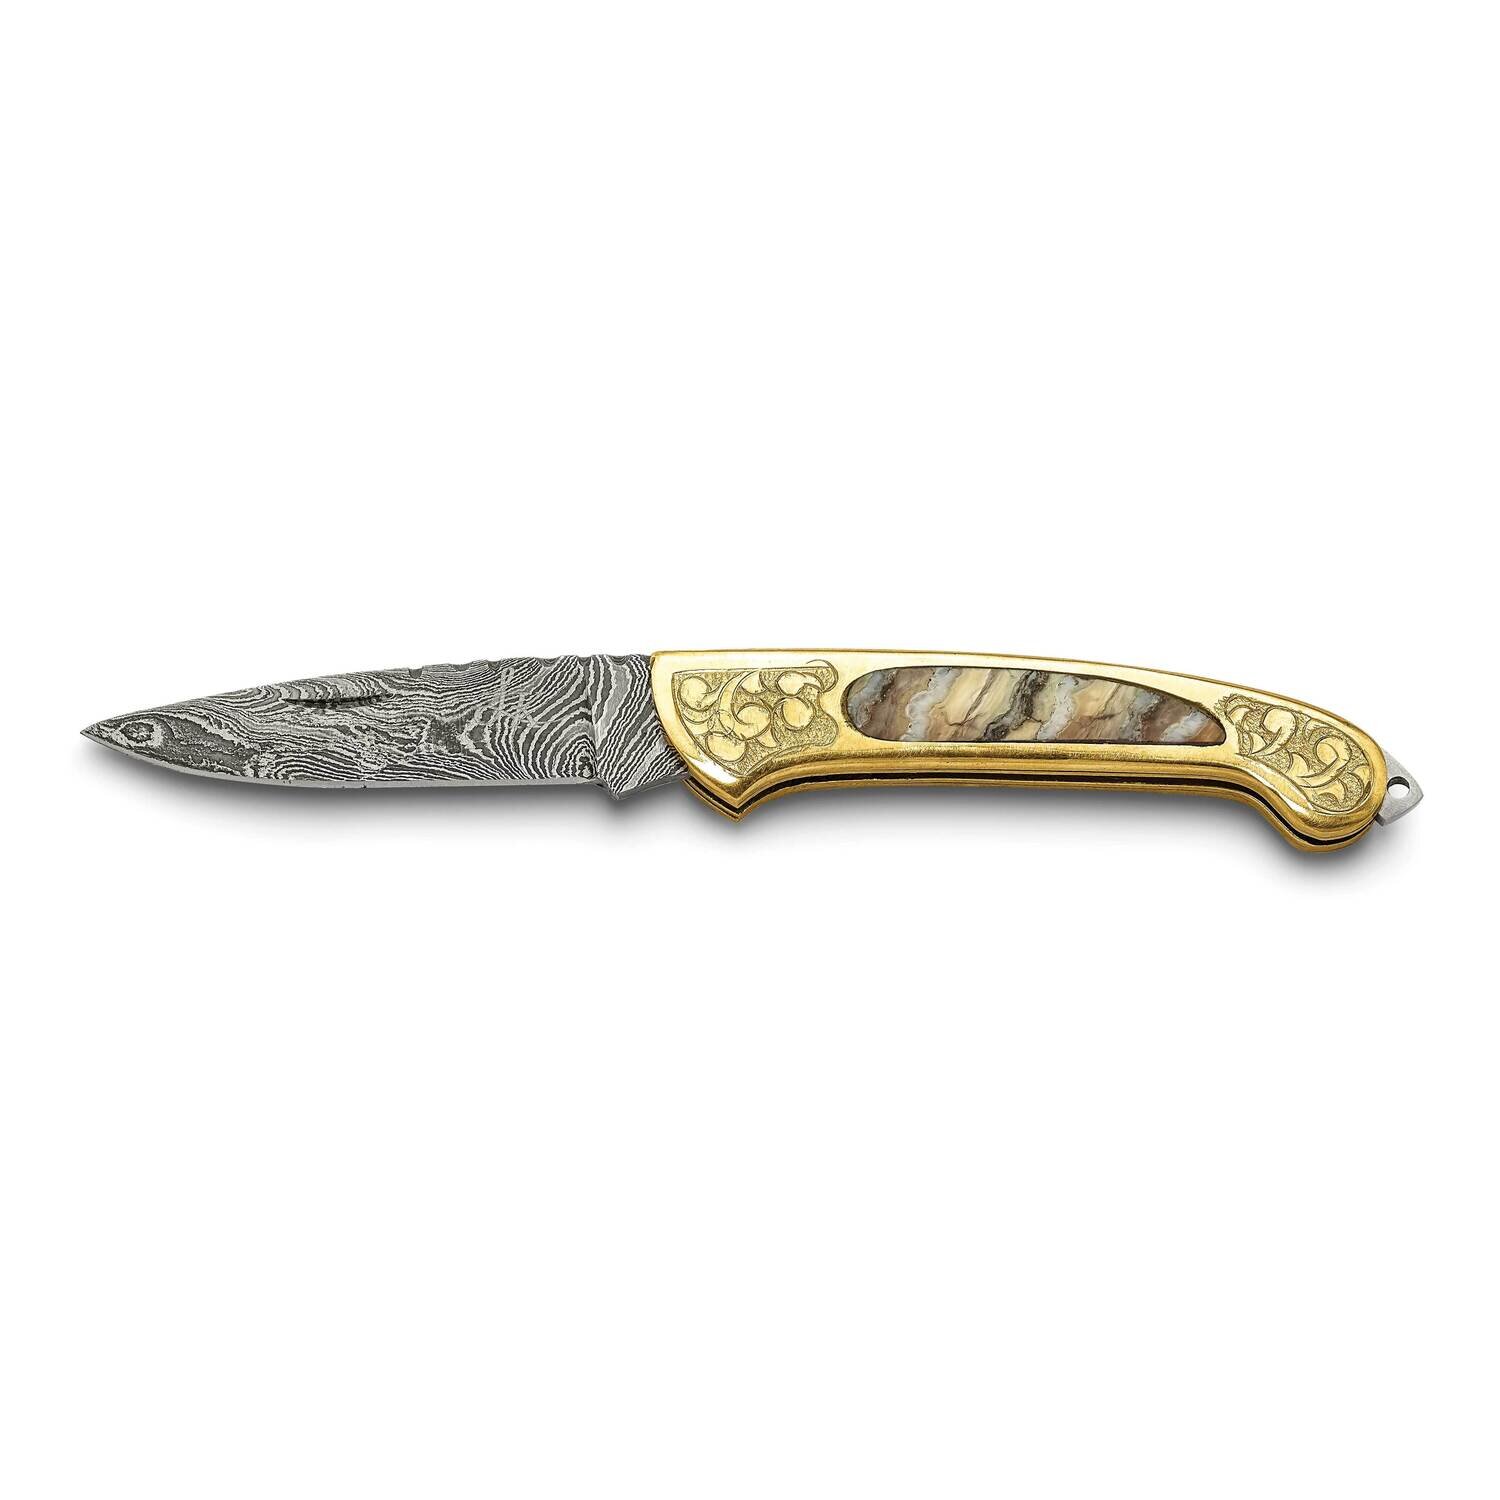 By Jere Limited Ed Damascus 256 Layer Brass/Woolly Mammoth Tooth Inlay Handle Folding Knife with Leather Sheath and Wooden Gift Box KN3264